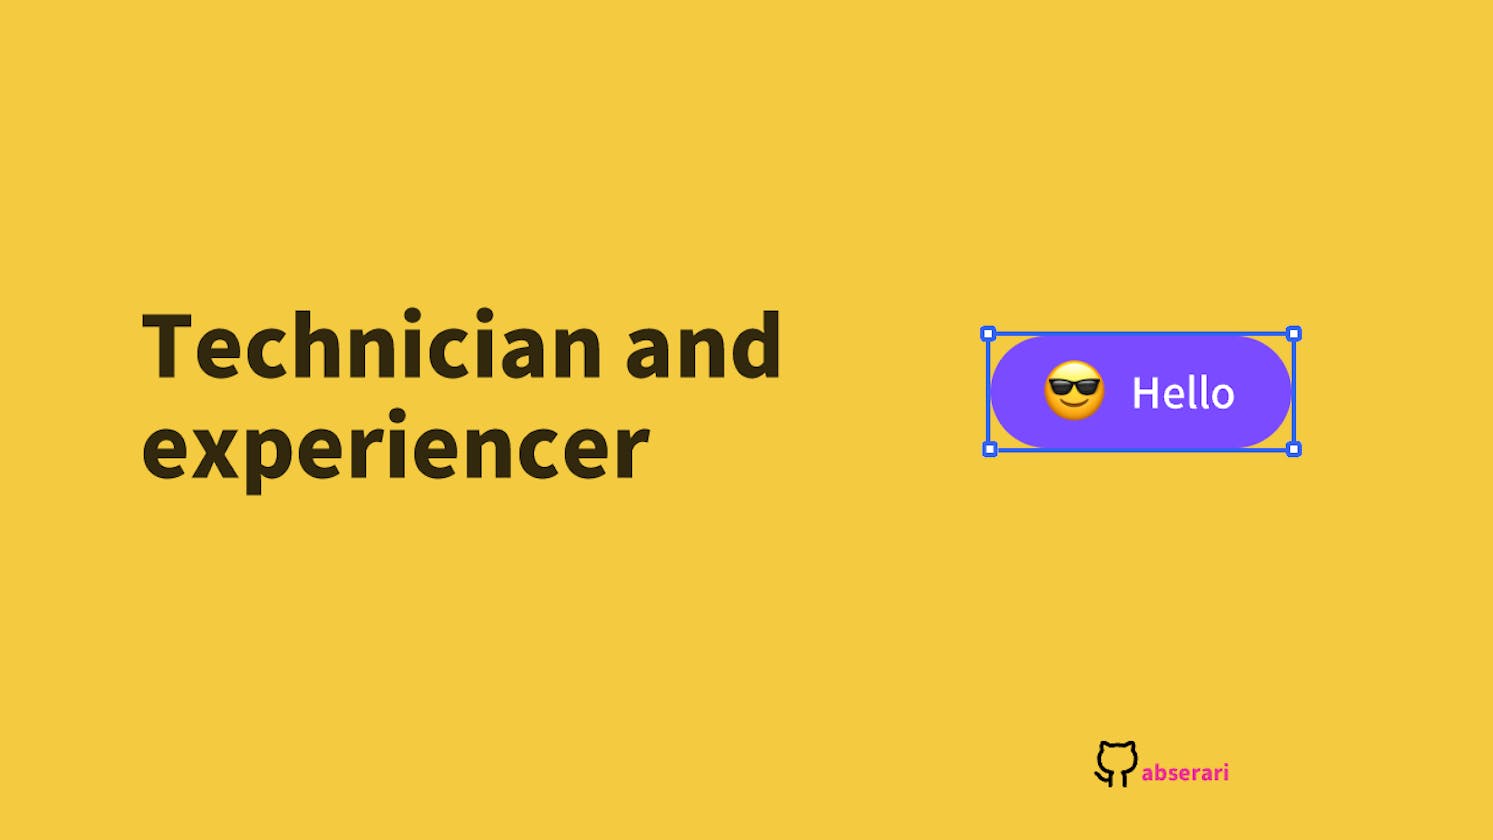 Technician and experiencer